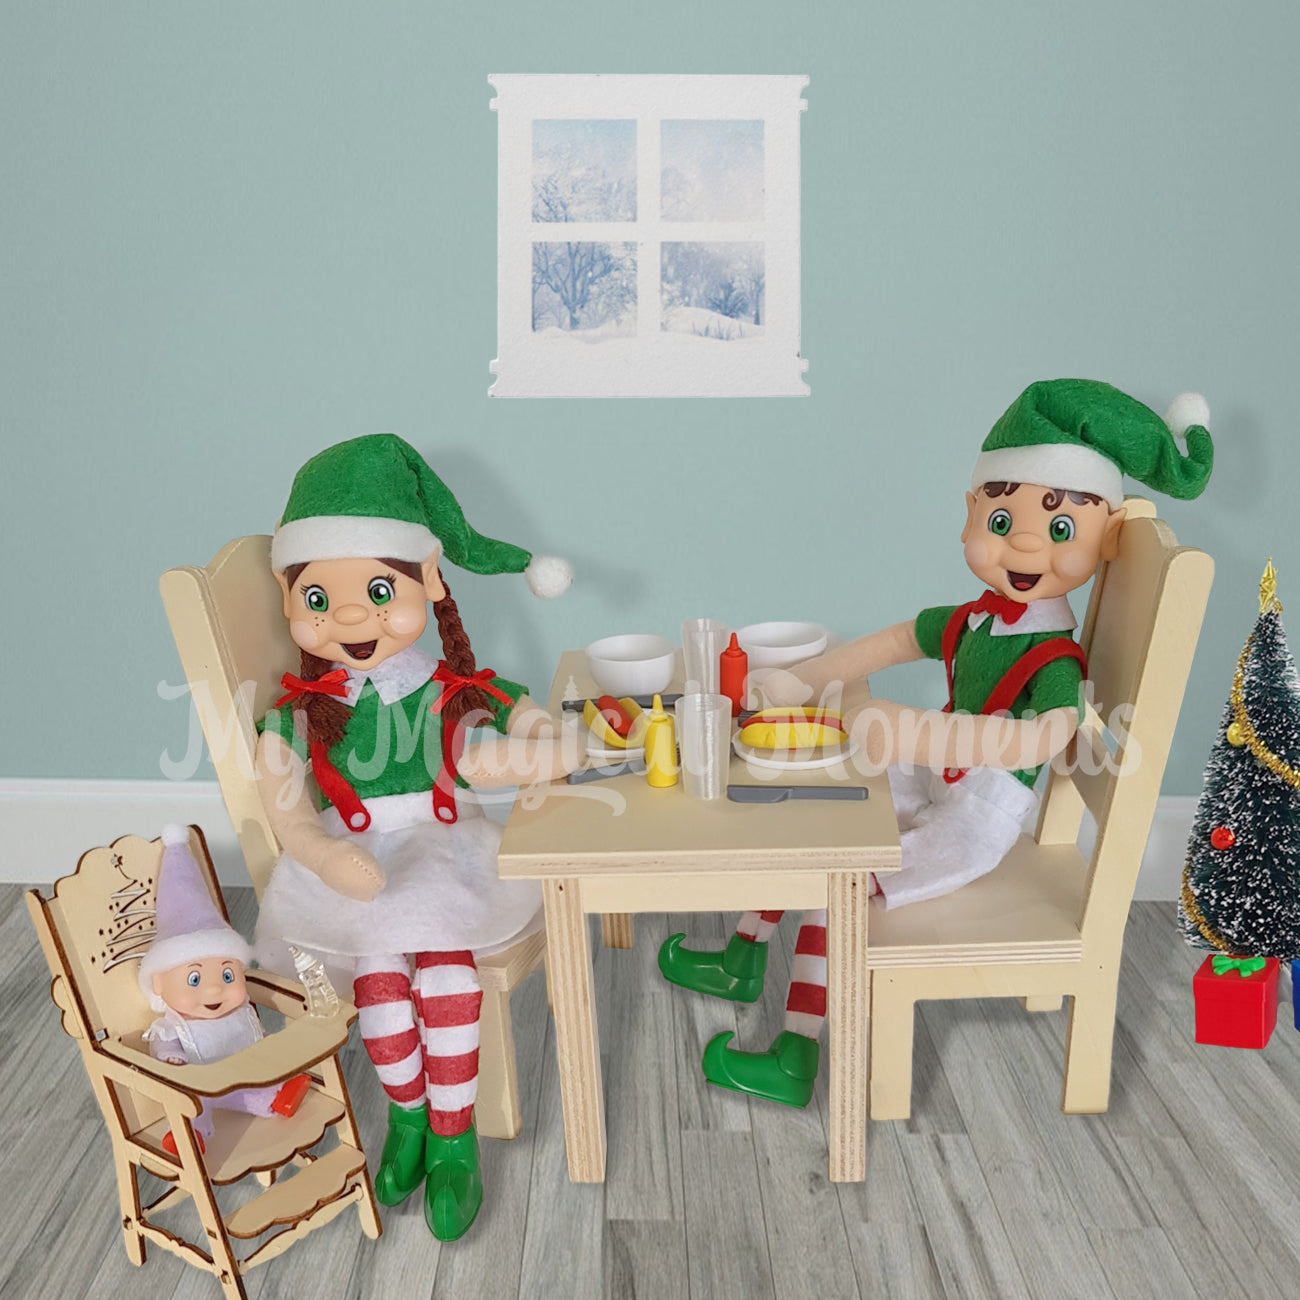 Elves having dinner at a elf sized wooden dining table with their elf baby in a high chair